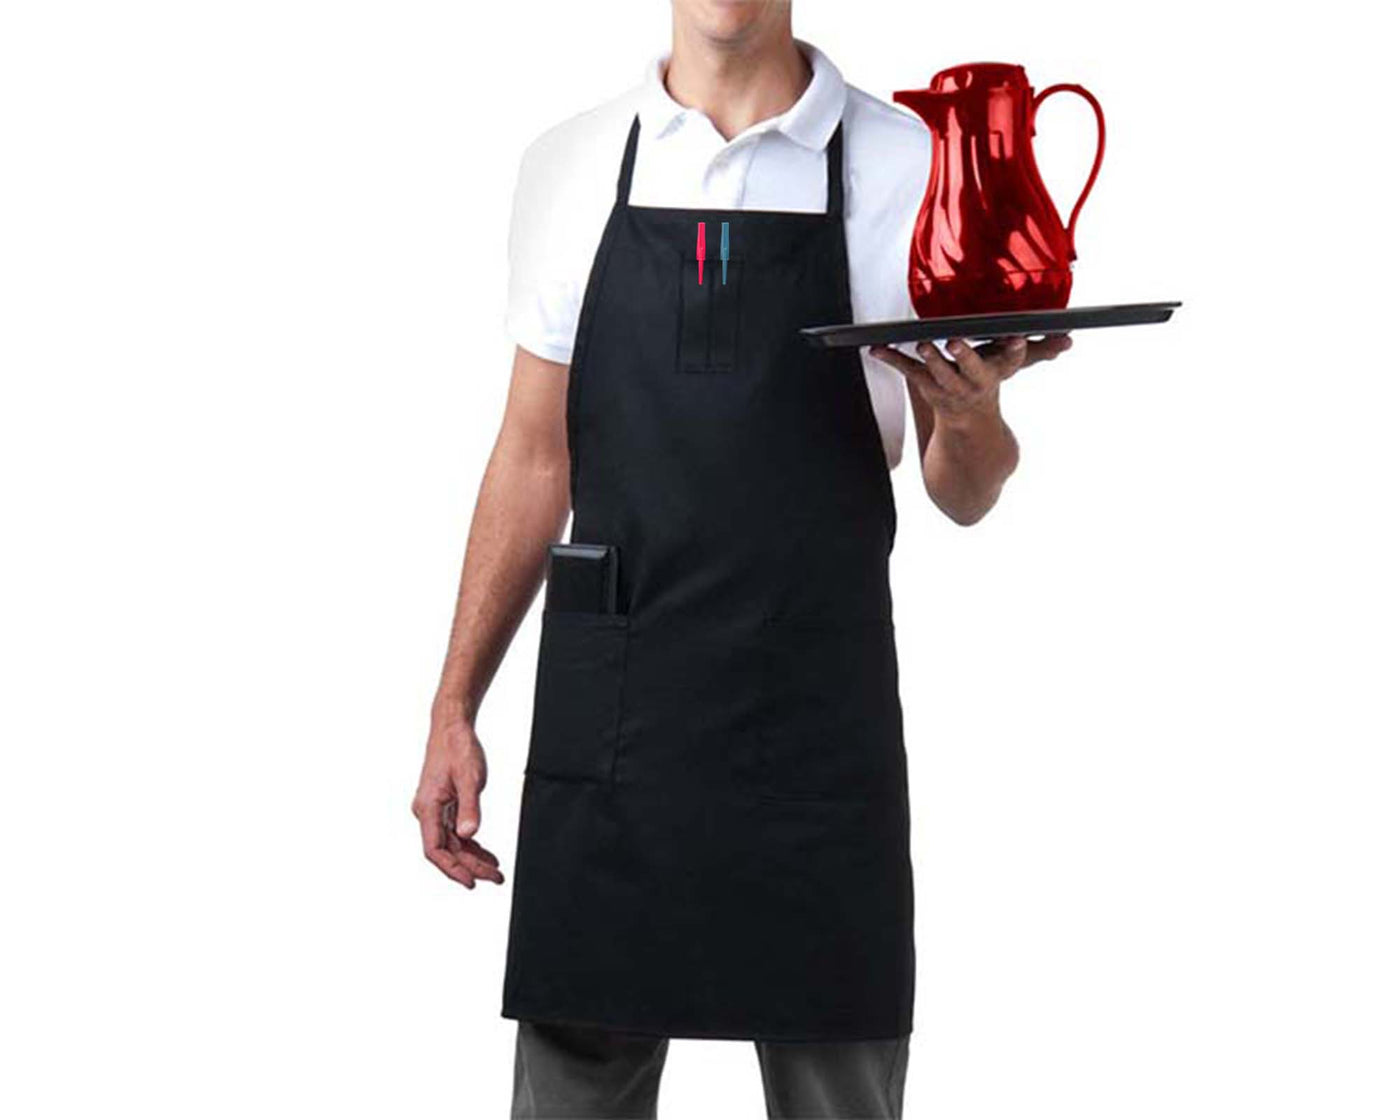 person wearing black bib apron with 3 pockets holding red tea pot